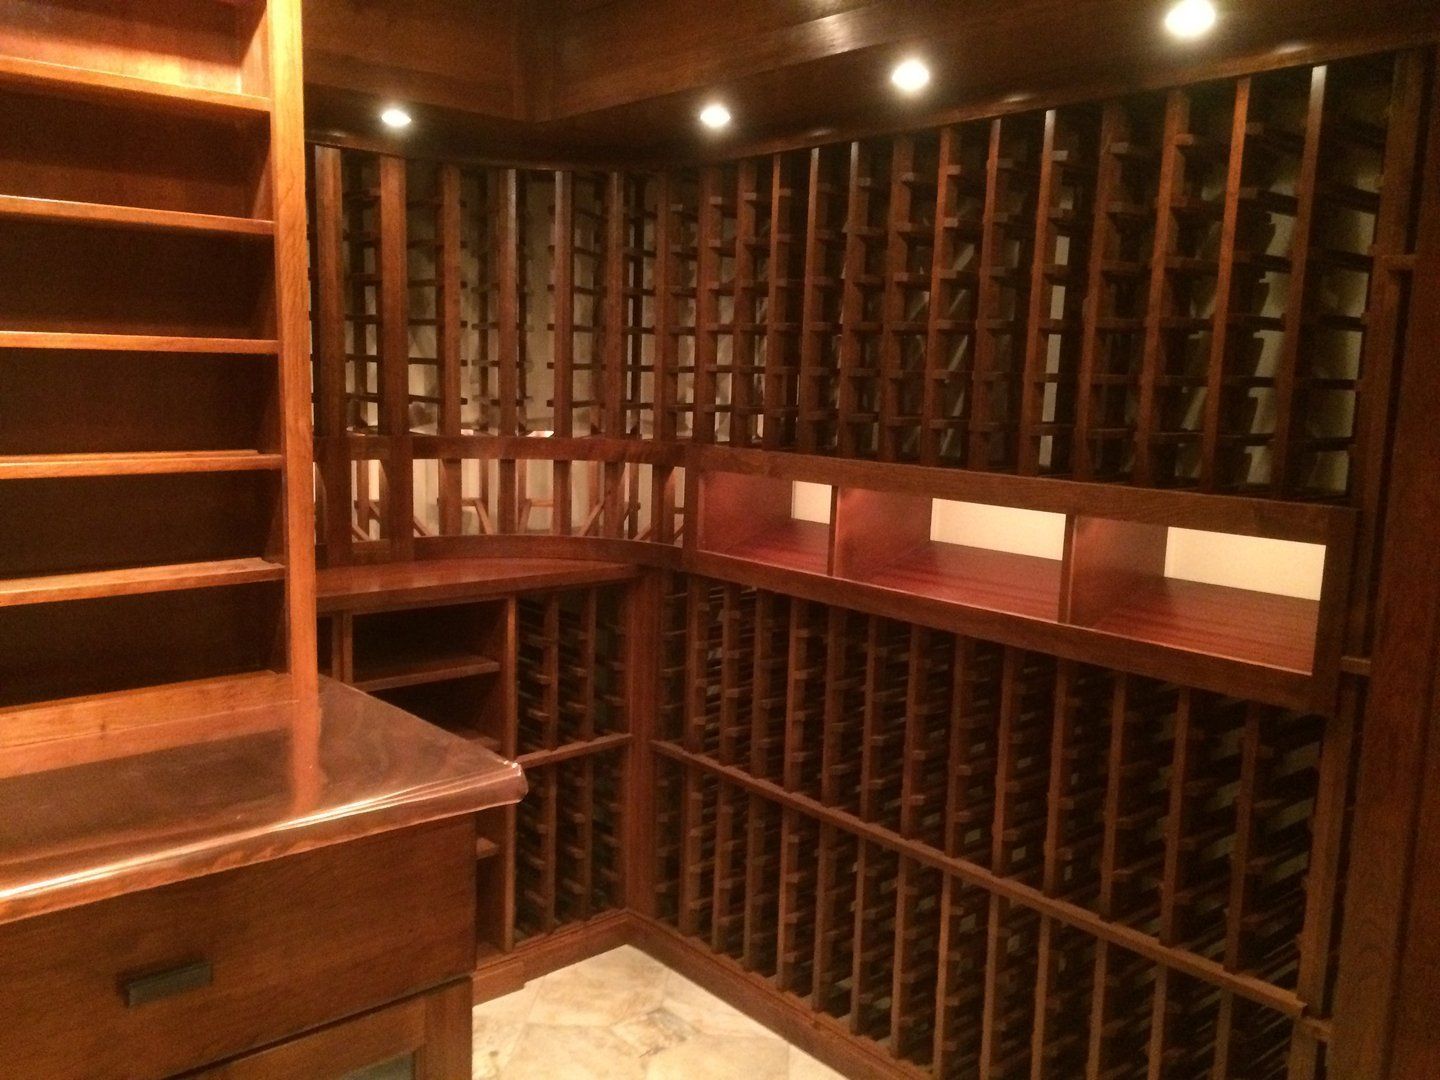 View of copper top, display row and individual wine racks